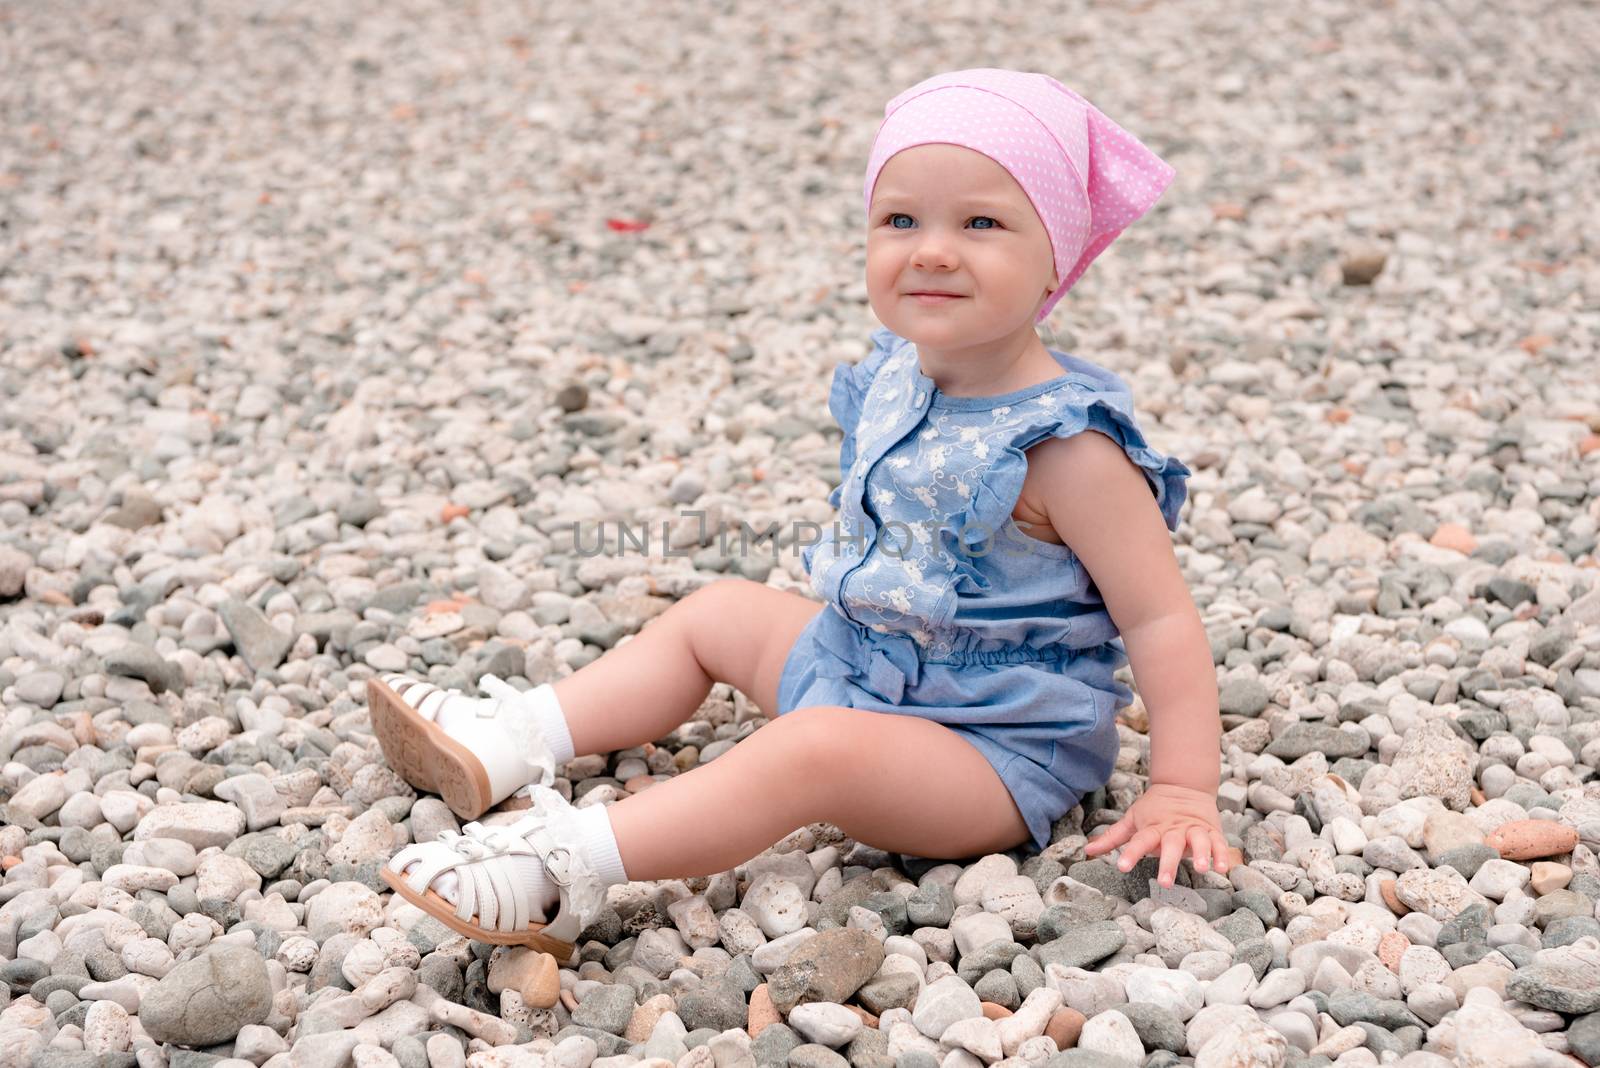 the baby in a pink cap, blue overalls, white socks and sandals sits on a large number of small stones